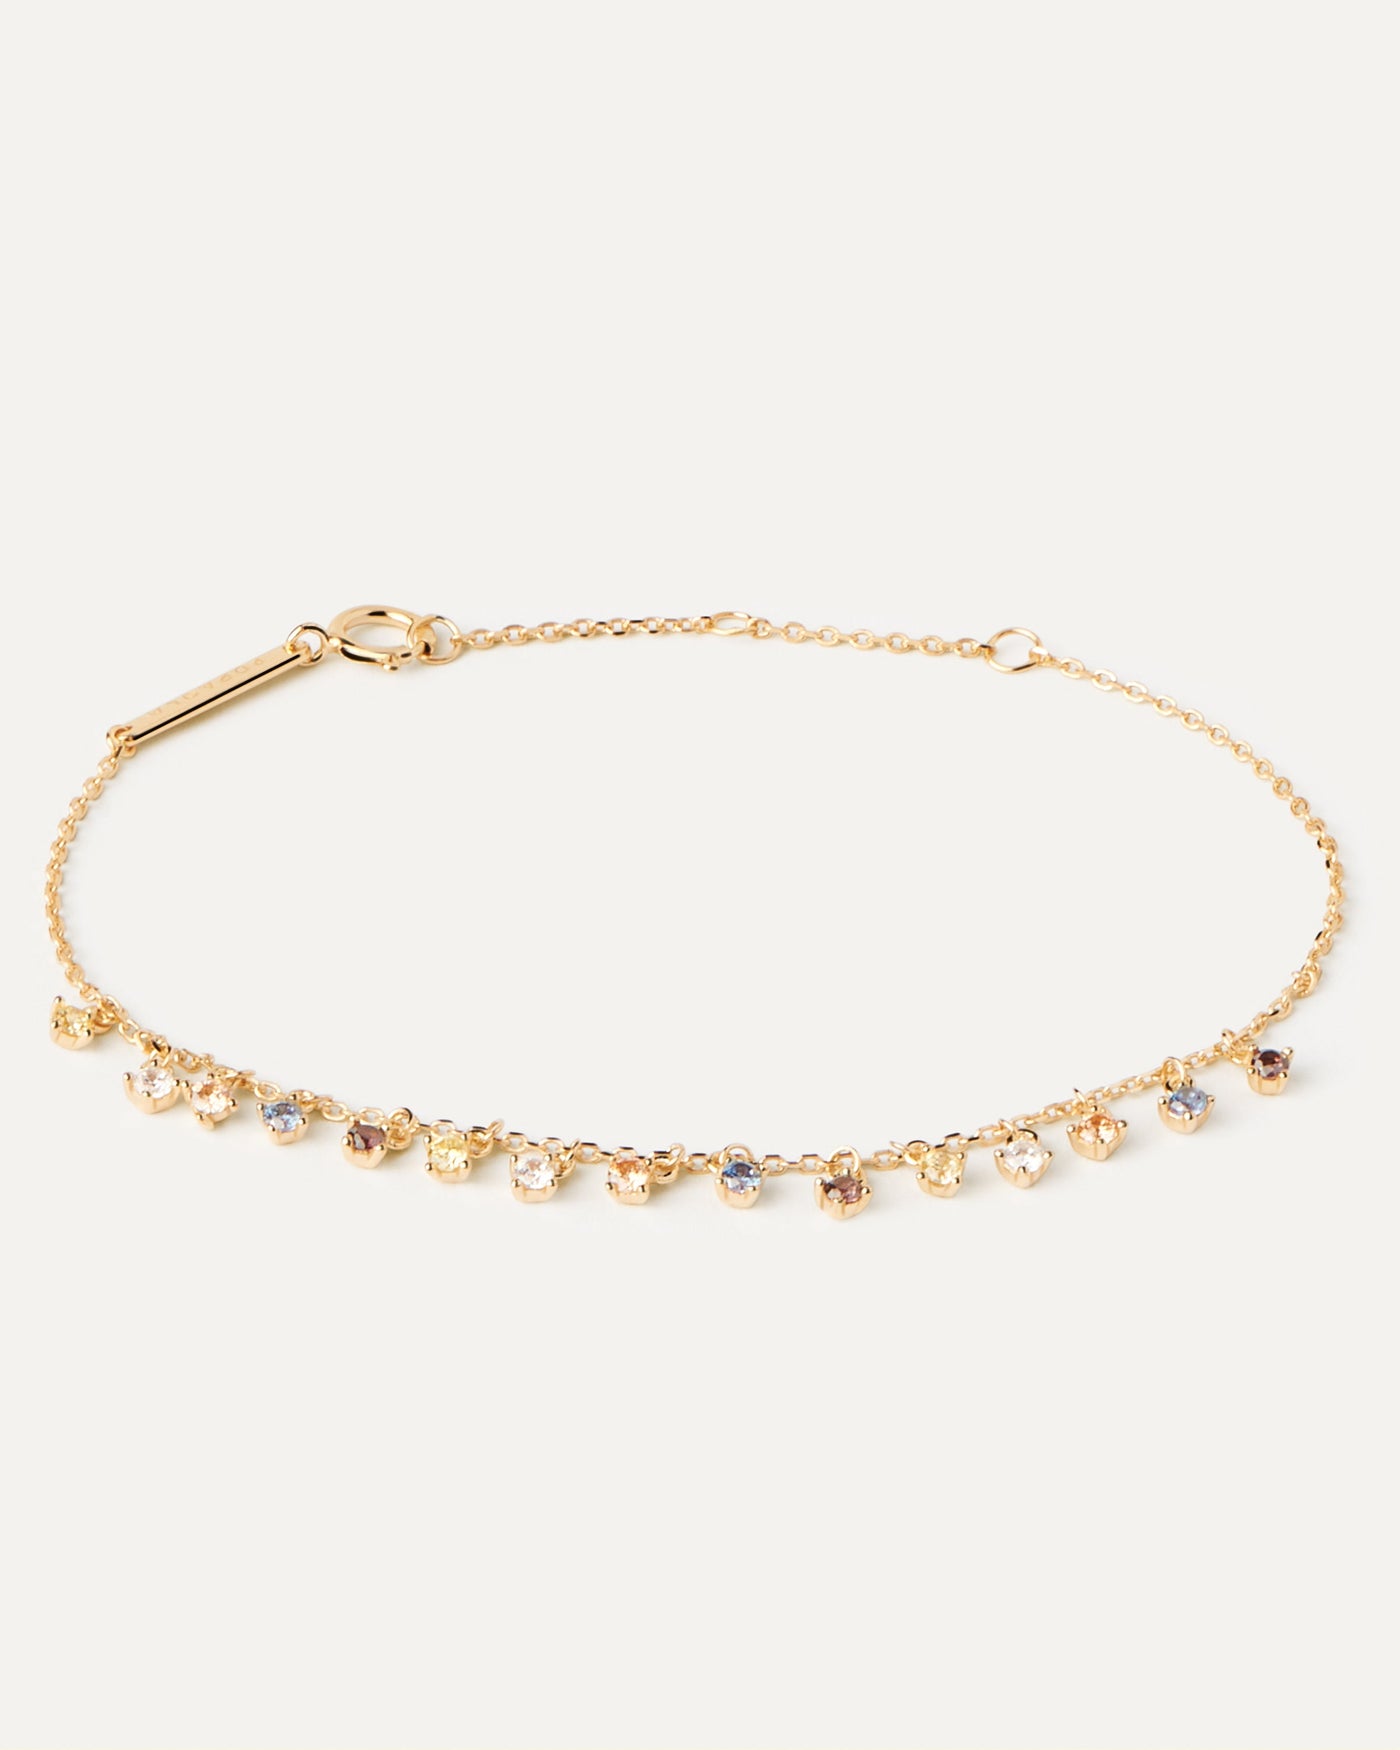 2023 Selection | Willow Bracelet. Gold-plated silver bracelet with 15 hanging stones of five different colors. Get the latest arrival from PDPAOLA. Place your order safely and get this Best Seller. Free Shipping.